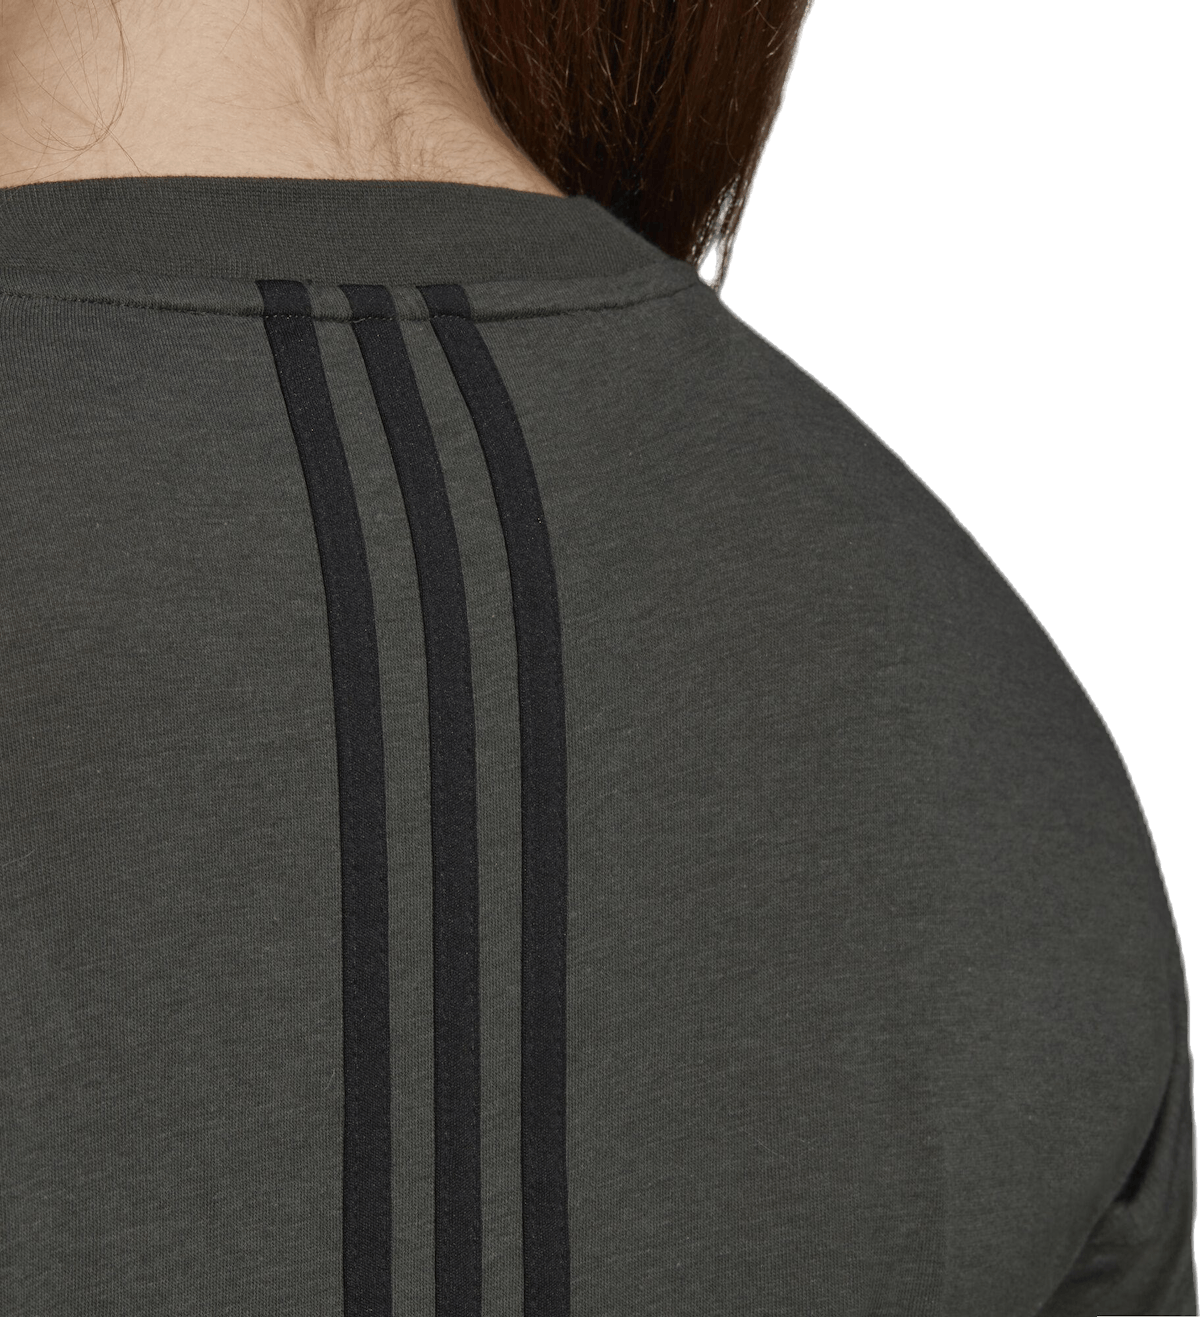 Must Haves 3-Stripes T-Shirt Green